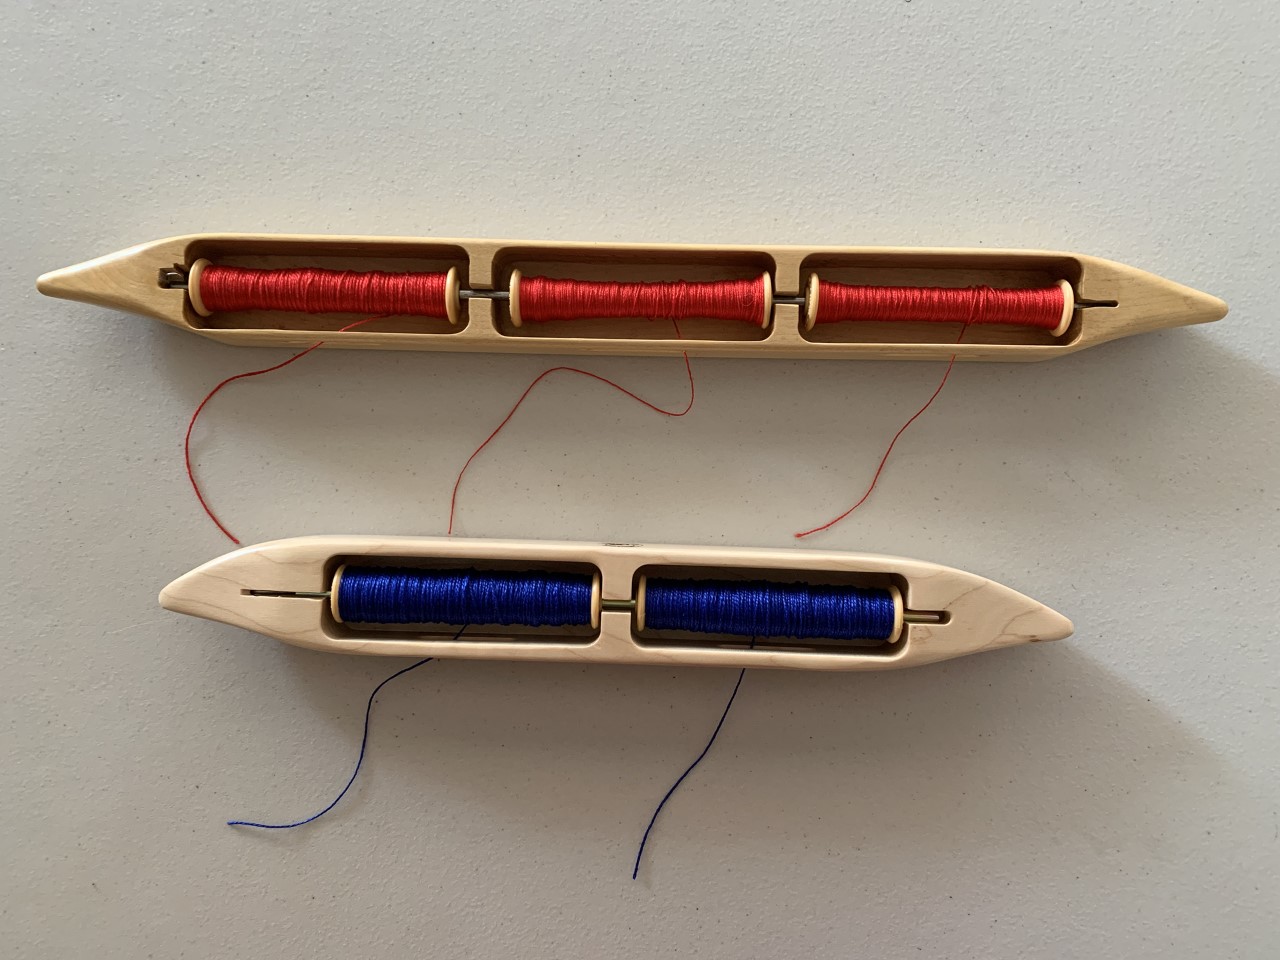 Shuttle with triple bobbin and shuttle with double bobbin